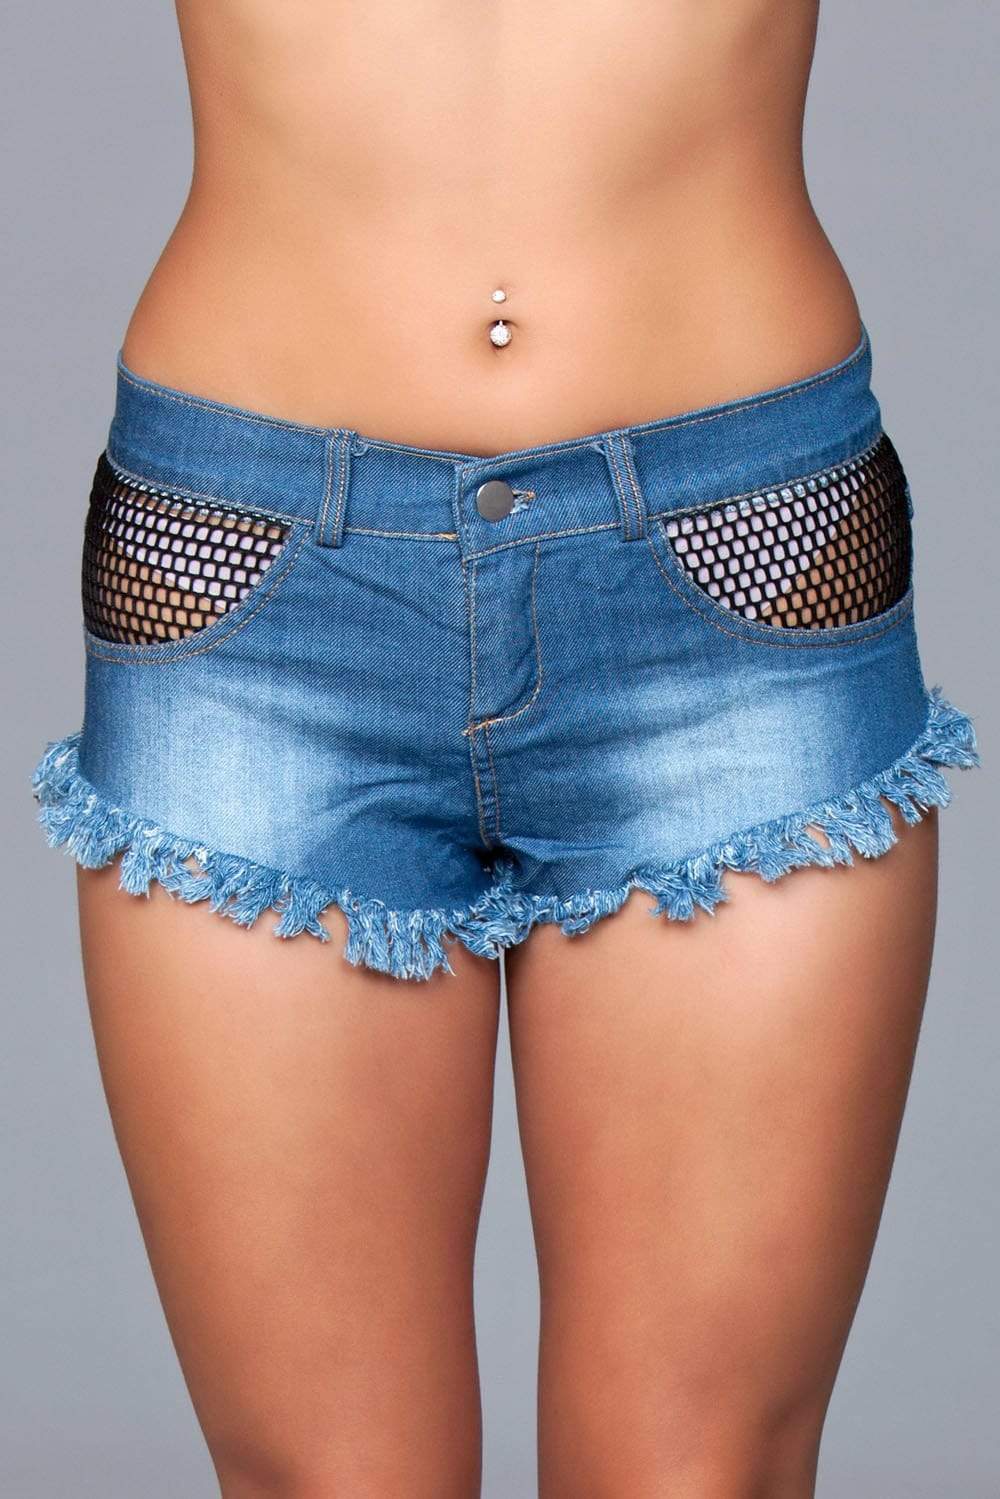 denim shorts with fishnet top trimming and fringe bottom details small